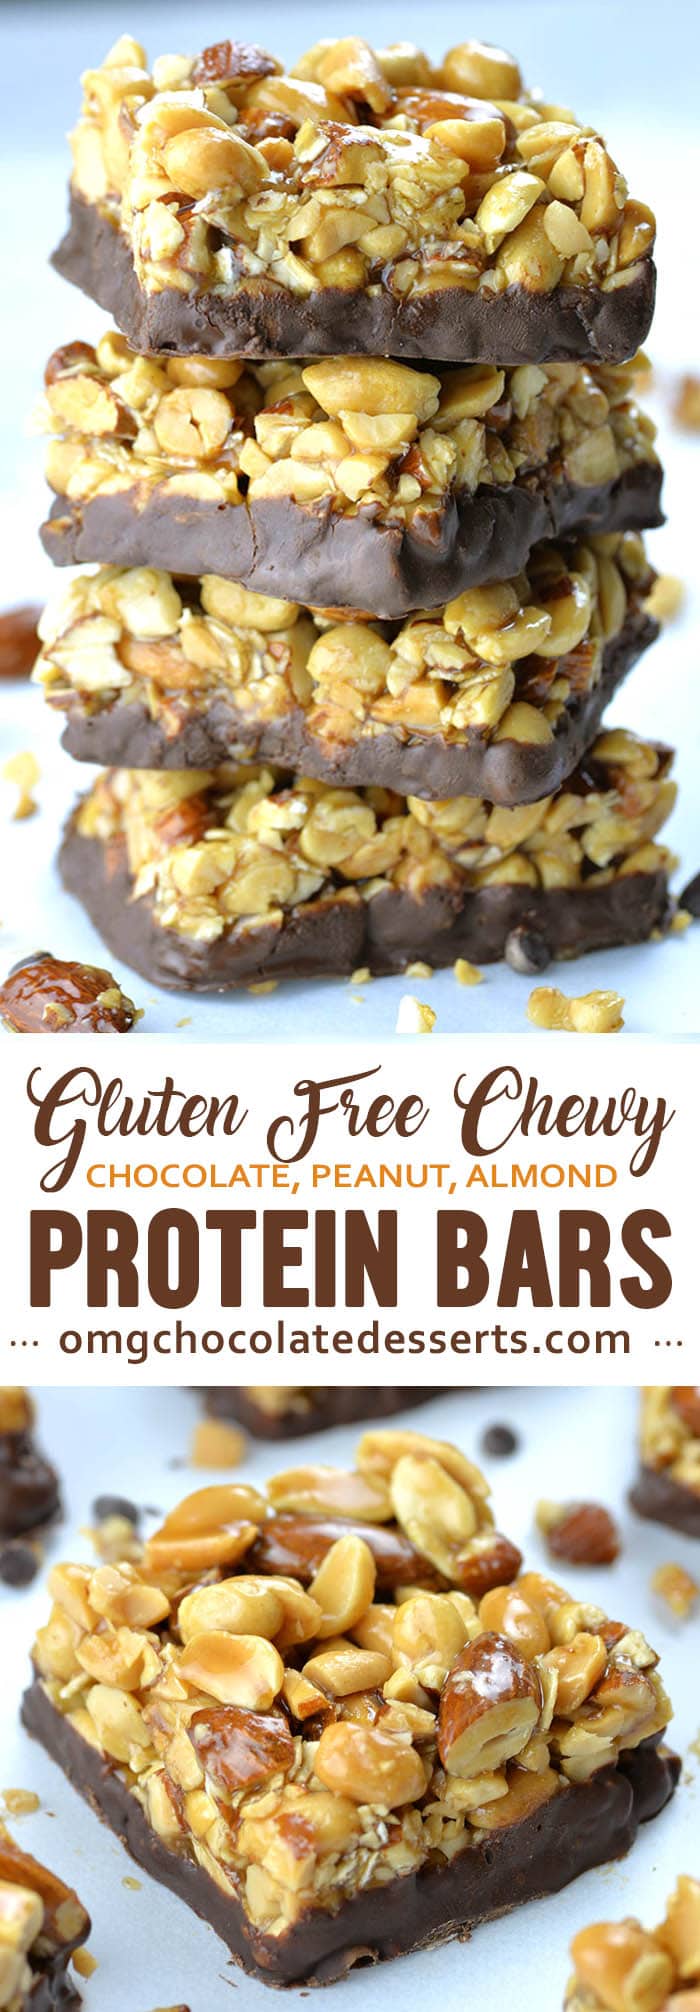 Gluten Free Protein Bars with peanuts and almond are healthy snack, easy to grab on-the-go and made with all-natural wholesome ingredients!